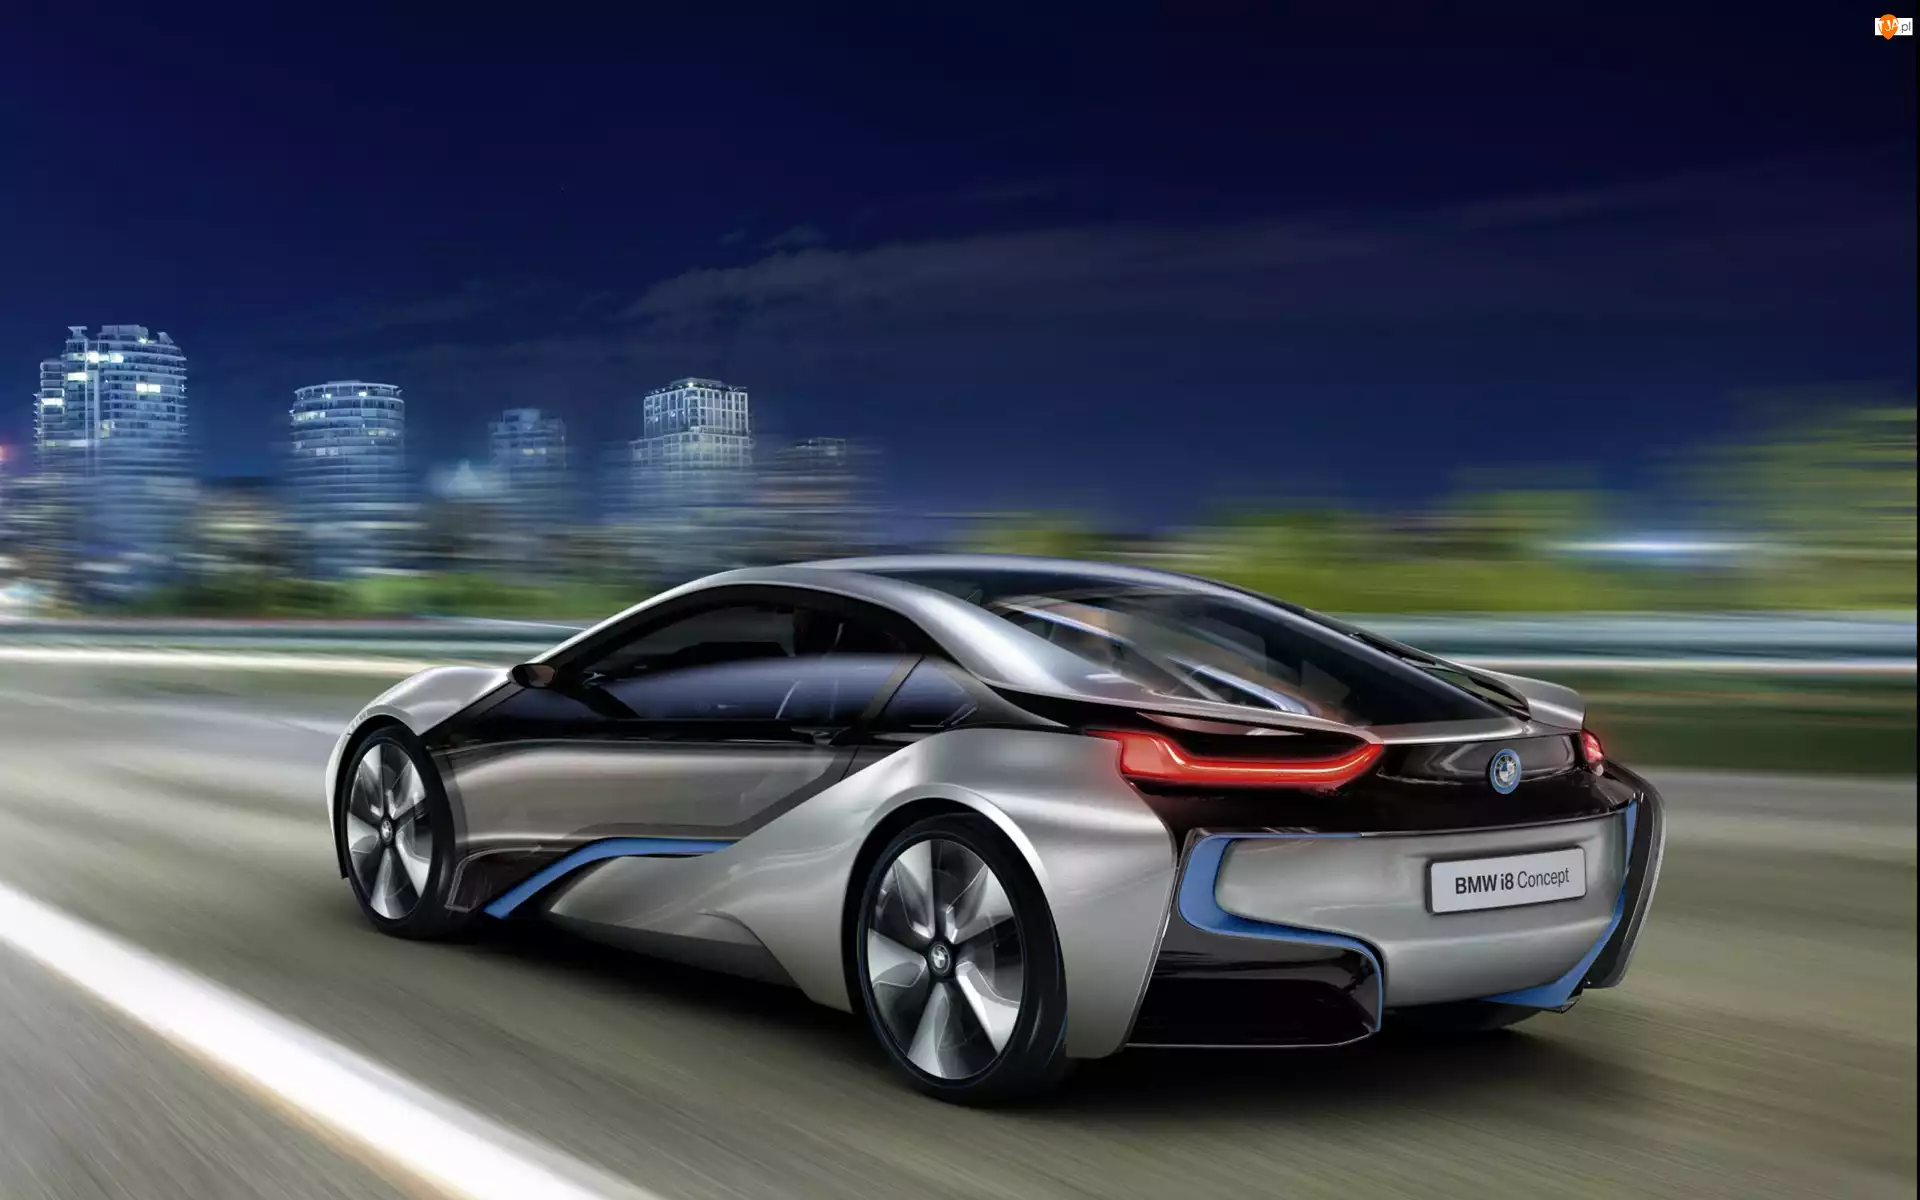 2013, BMW i8 Coupe, Concept